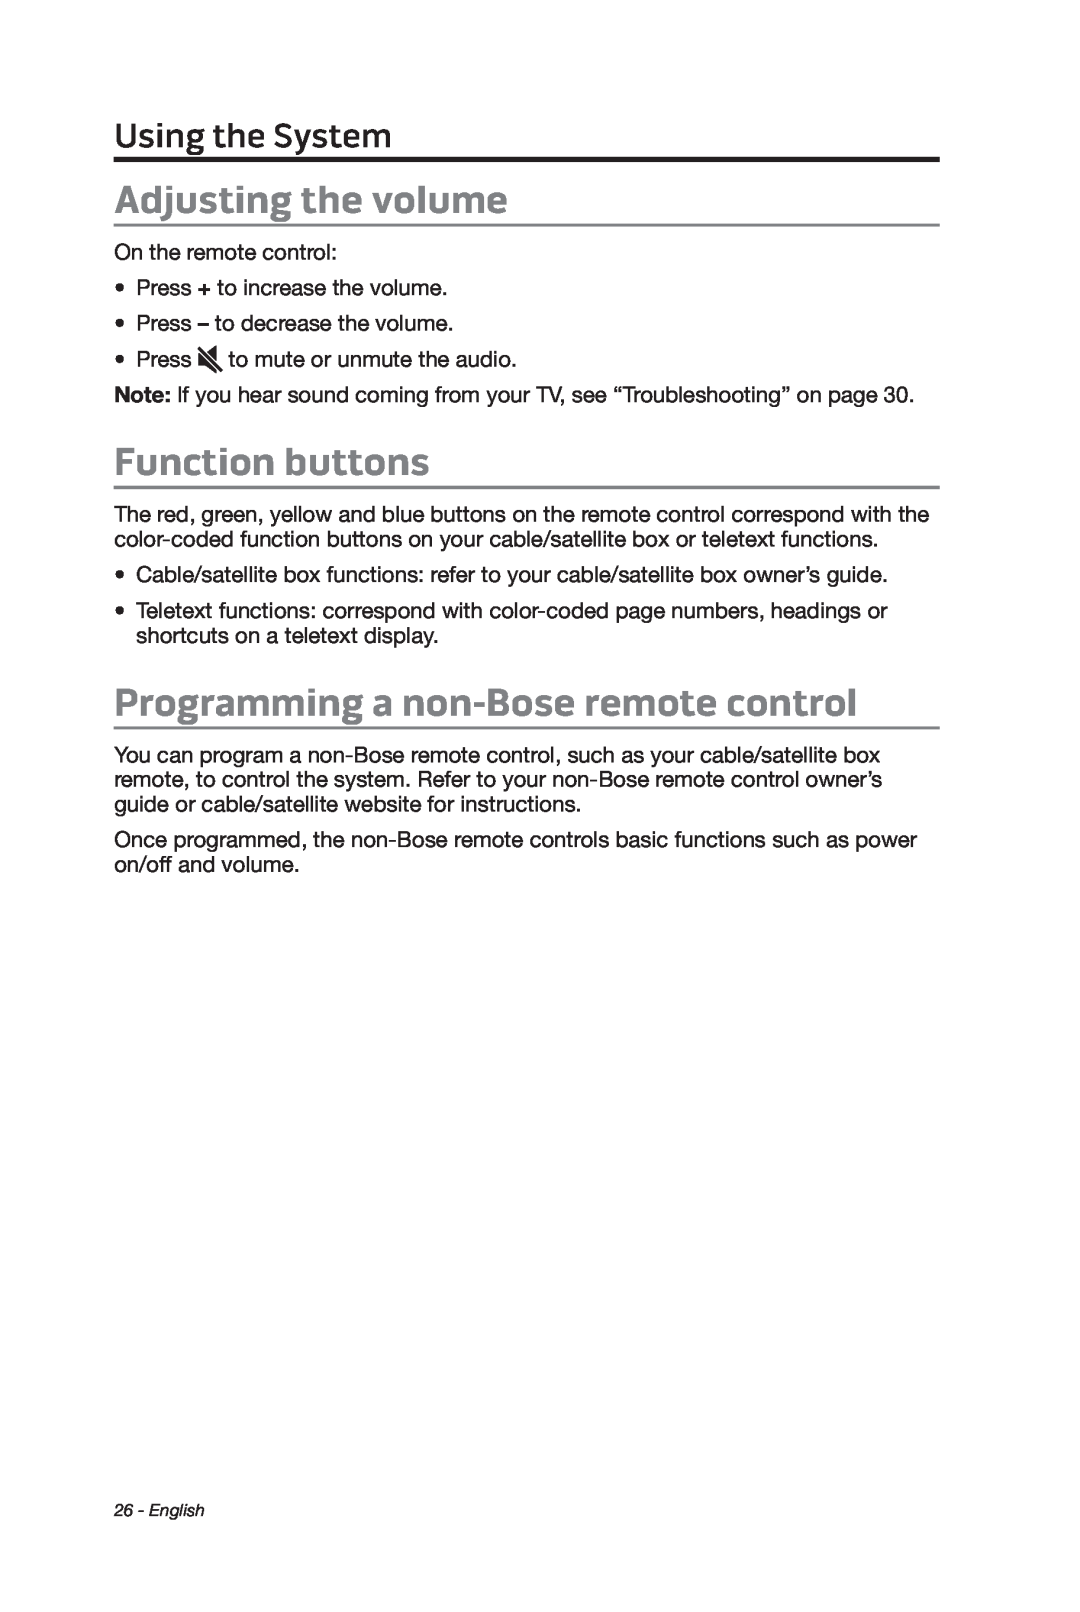 Bose cinemate manual Adjusting the volume, Function buttons, Programming a non-Boseremote control, Using the System 